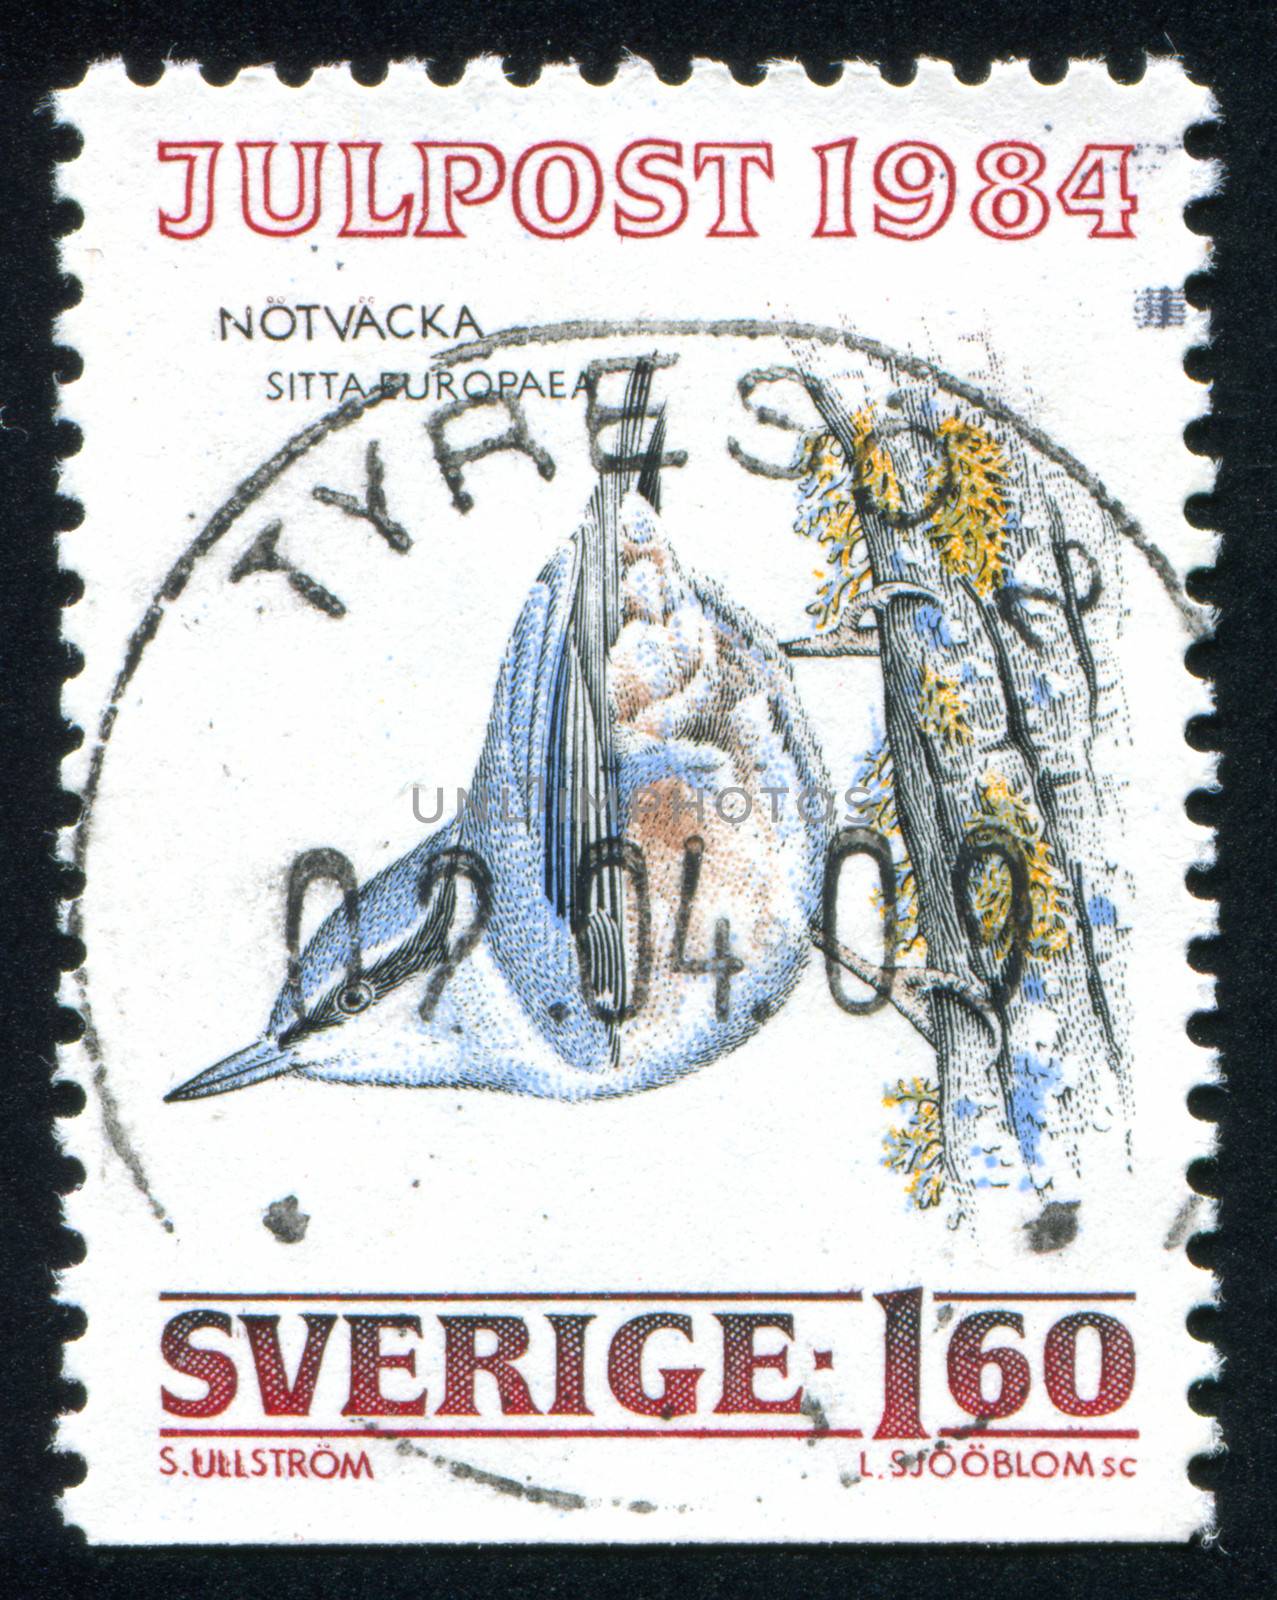 SWEDEN - CIRCA 1984: stamp printed by Sweden, shows Eurasian Nuthatch, circa 1984